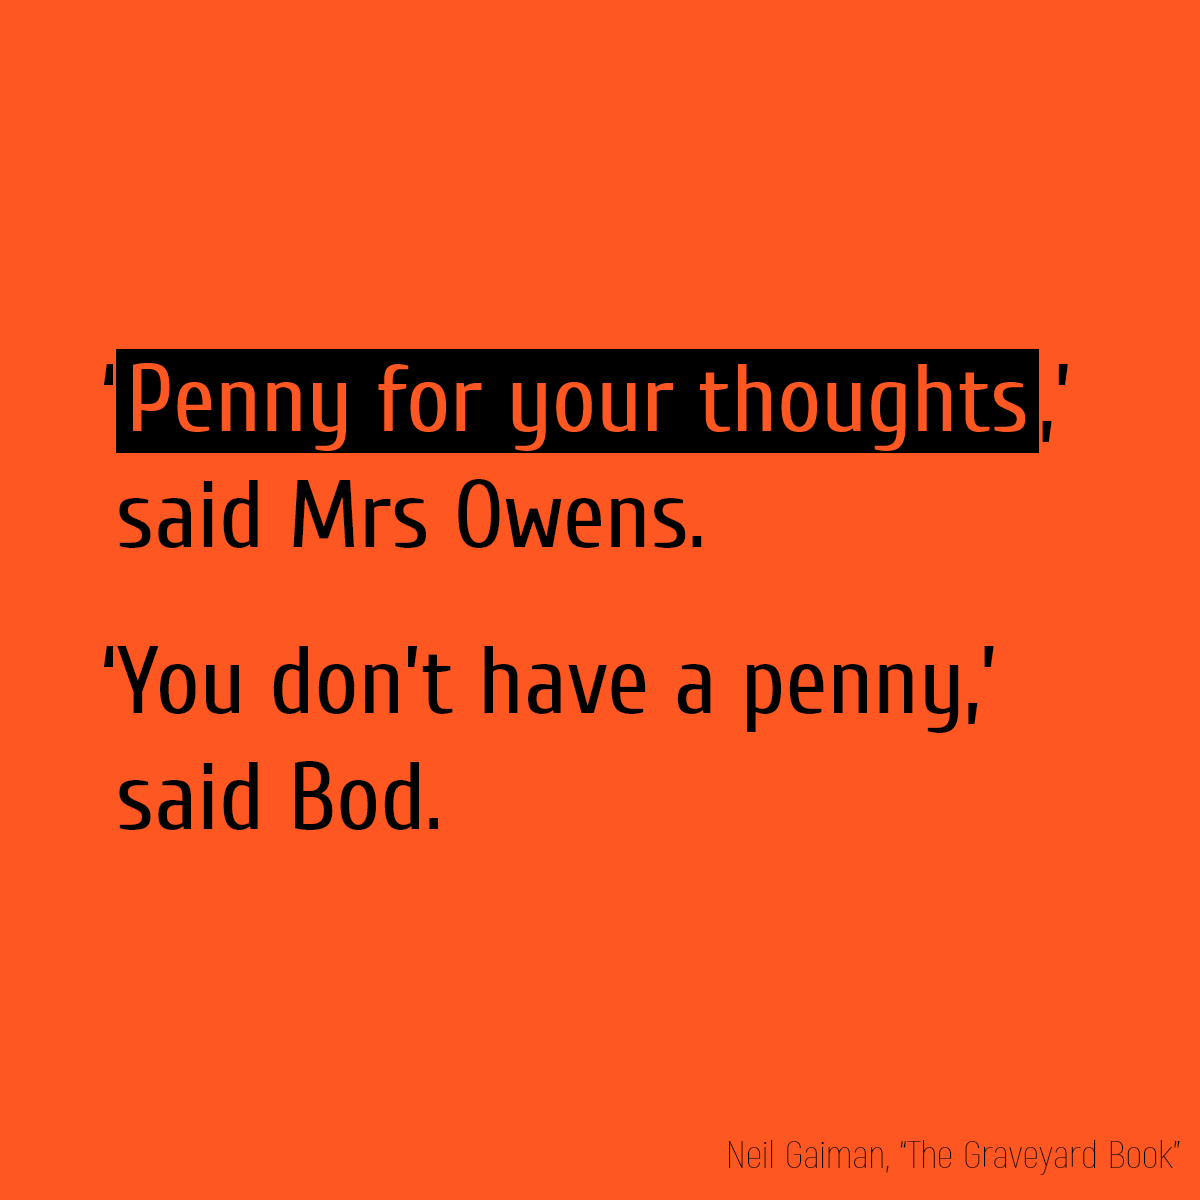 ‘**Penny for your thoughts**,’ said Mrs Owens. ‘You don’t have a penny,’ said Bod.